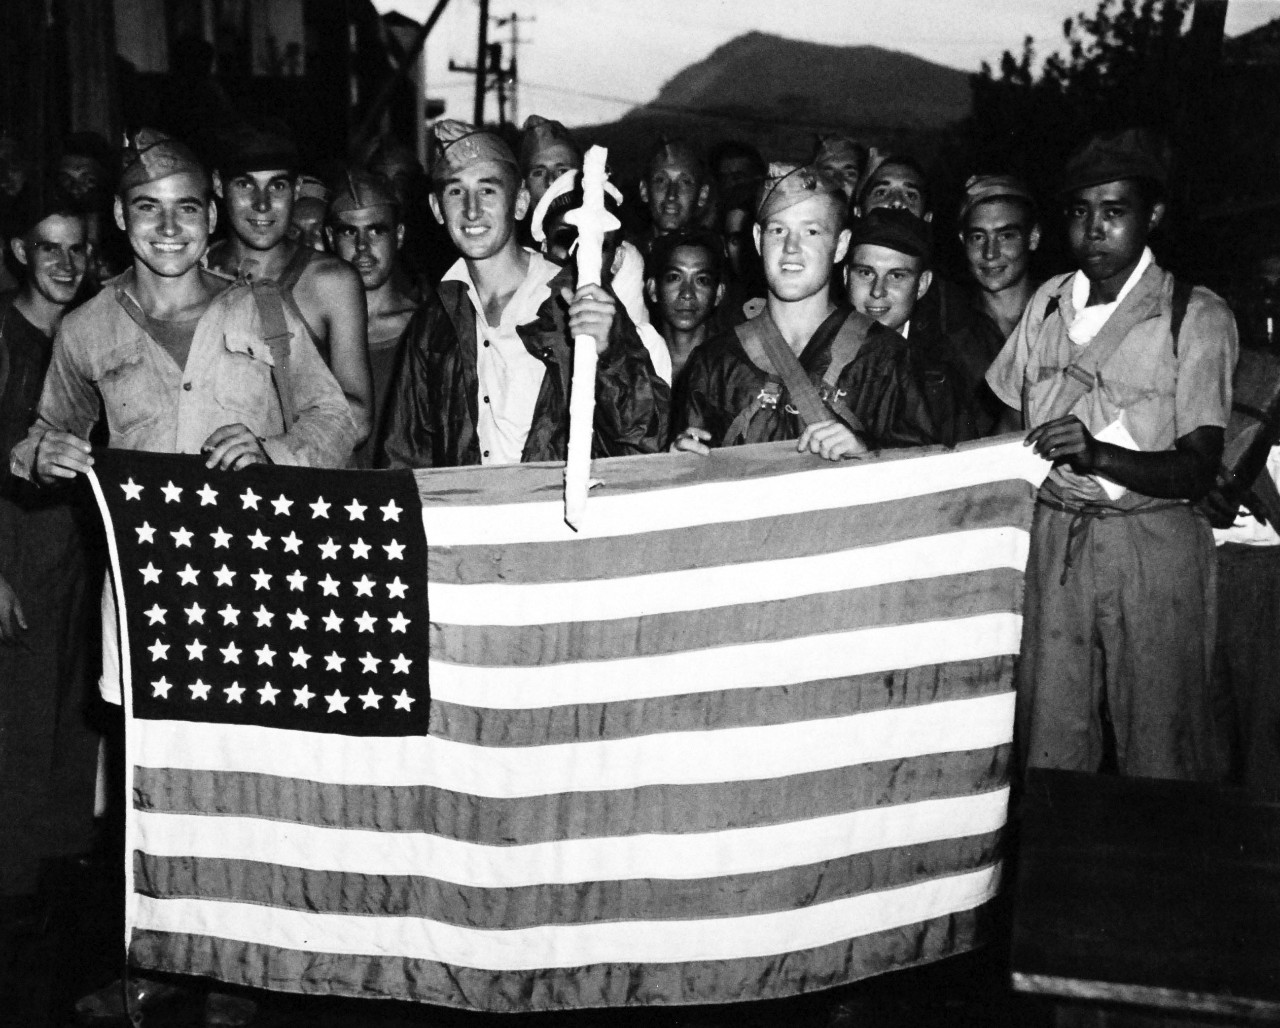 80-G-495671:   Allied Prisoners of War, Japan, 1945.   This United States Flag, held by grinning Allied Prisoners of War of the Japanese, was made from scraps of parachutes dropped by U.S. Navy and Army planes in mercy flights over the camps in the Nagasaki area of Japan.   The fliers dropped food, clothing and medical supplies to the prisoners who were rescued 13 September by mercy squads of the U.S. Navy.   Photograph released October 1, 1945.   Official U.S. Navy photograph, now in the collections of the National Archives.  (2014/05/29).    The original is a small photograph.   